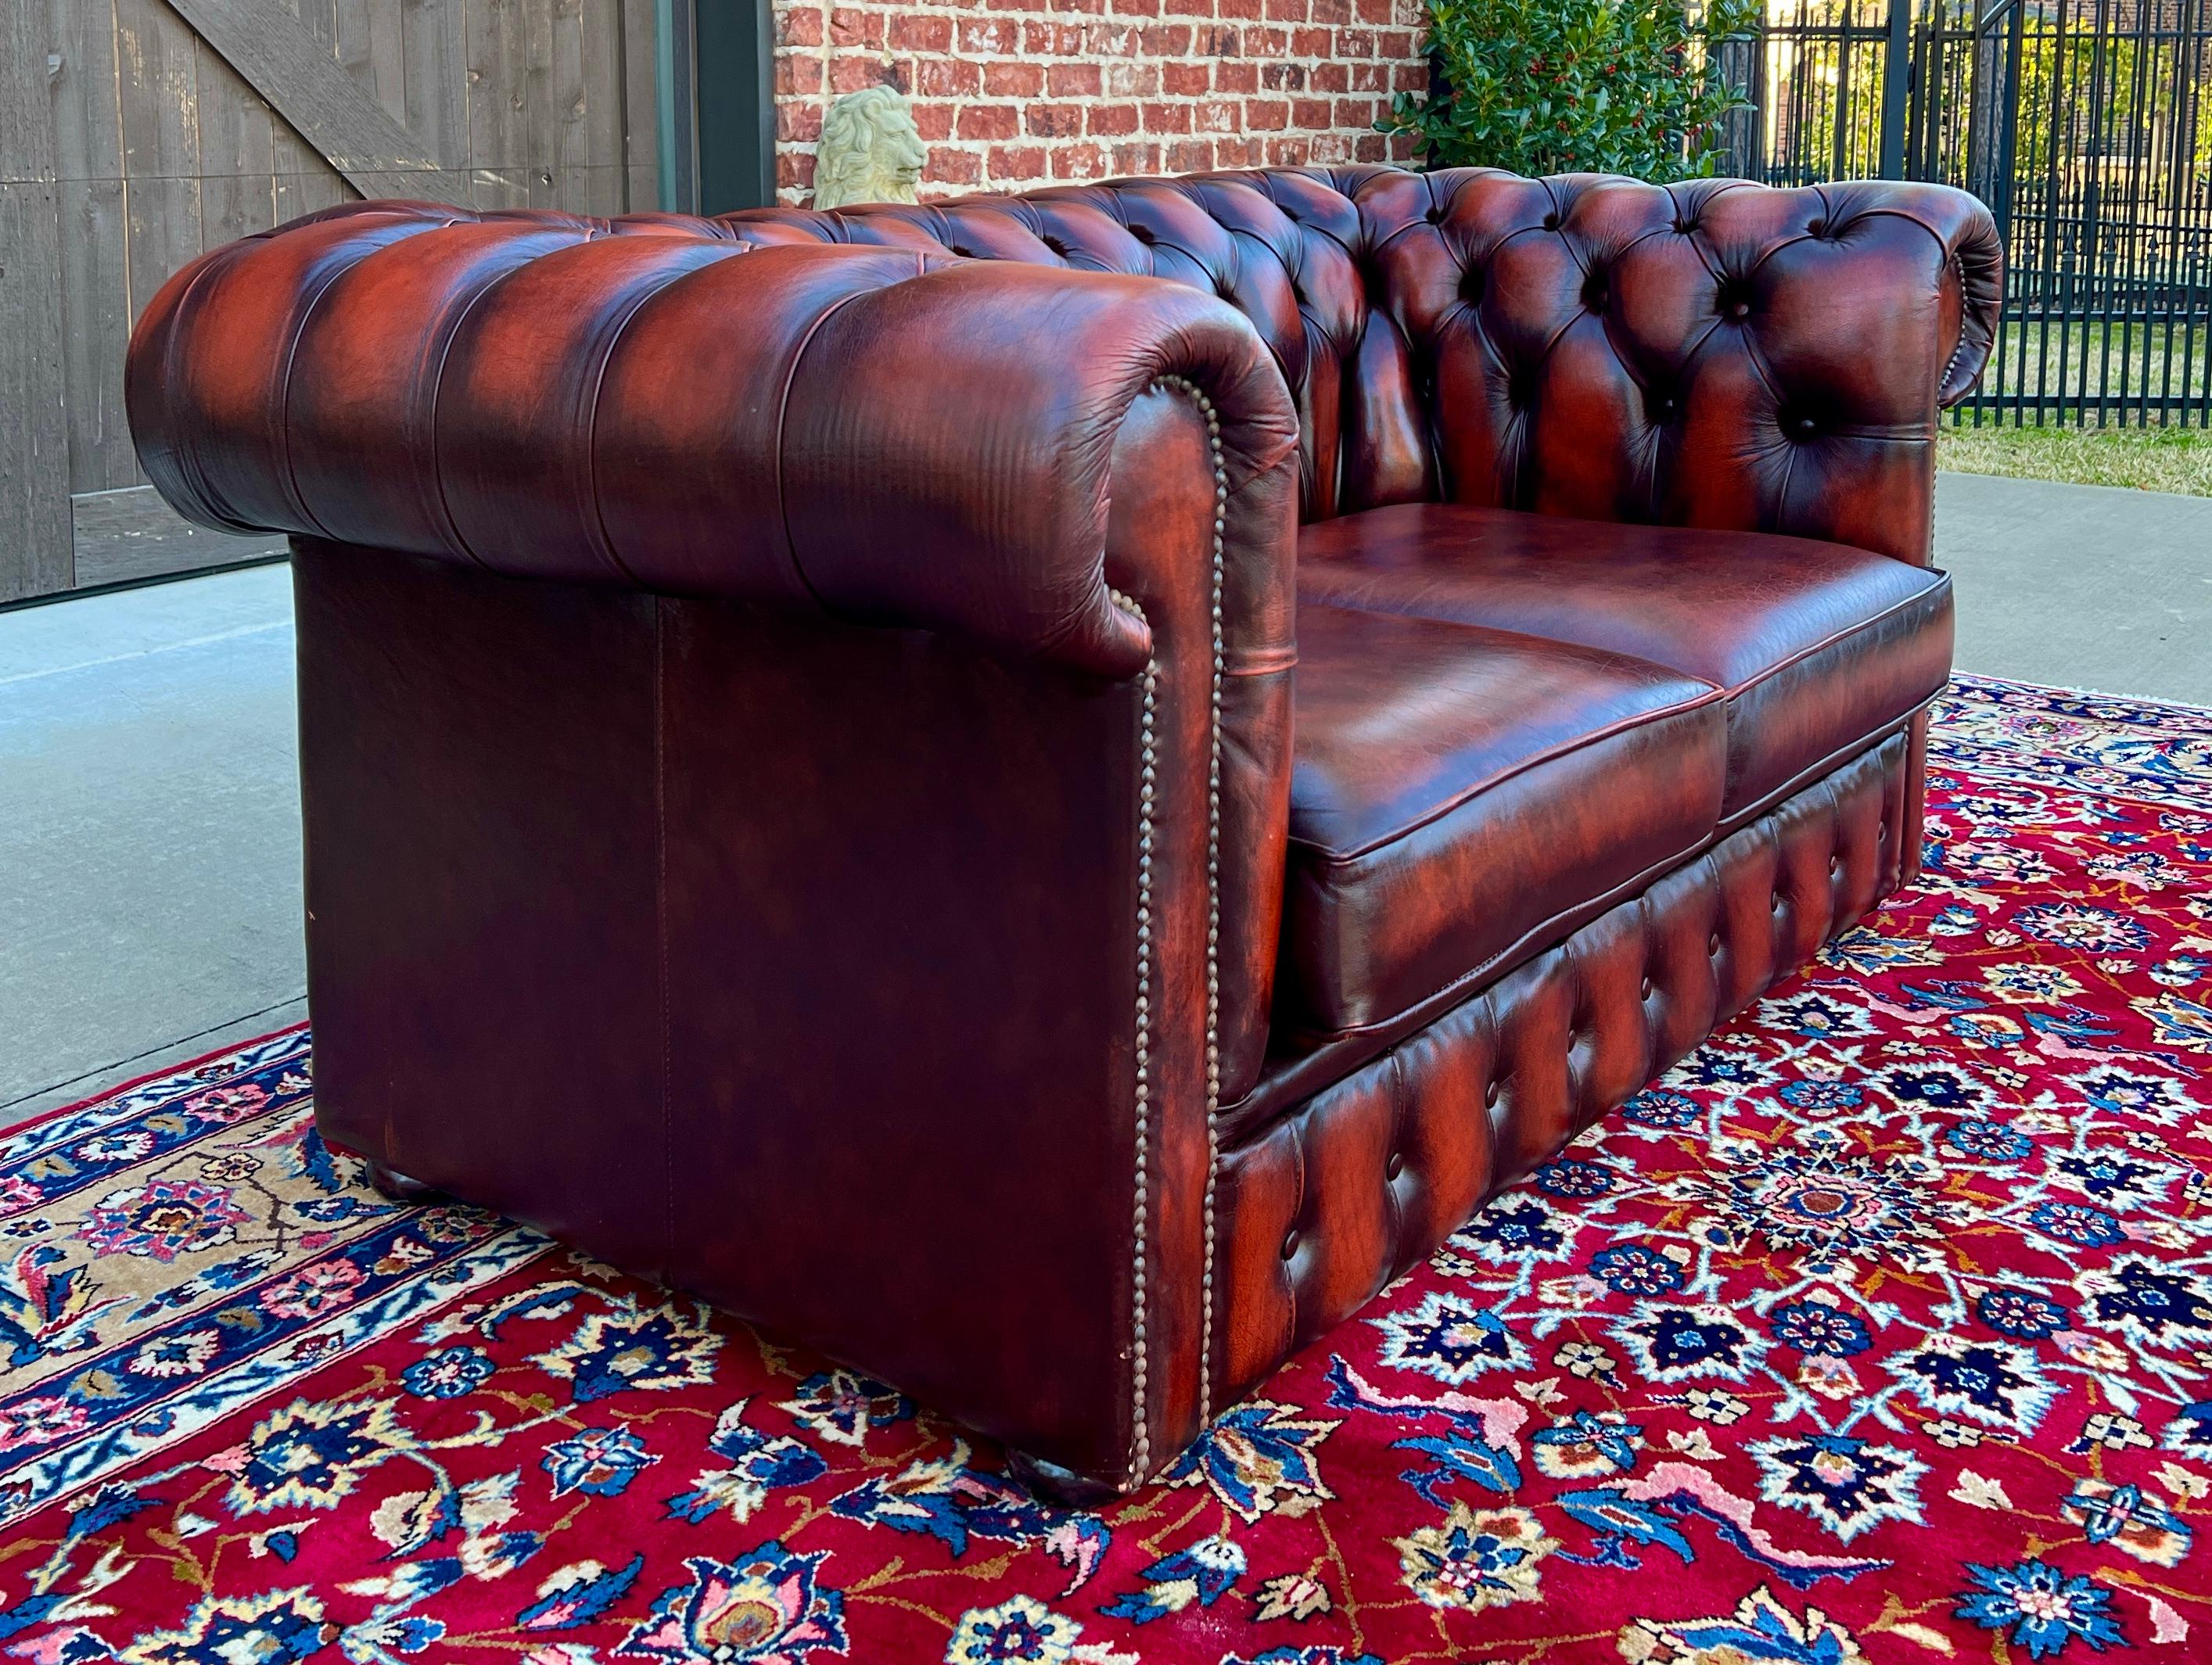 Vintage English Chesterfield Leather Tufted Love Seat Sofa Oxblood Red #2 For Sale 7